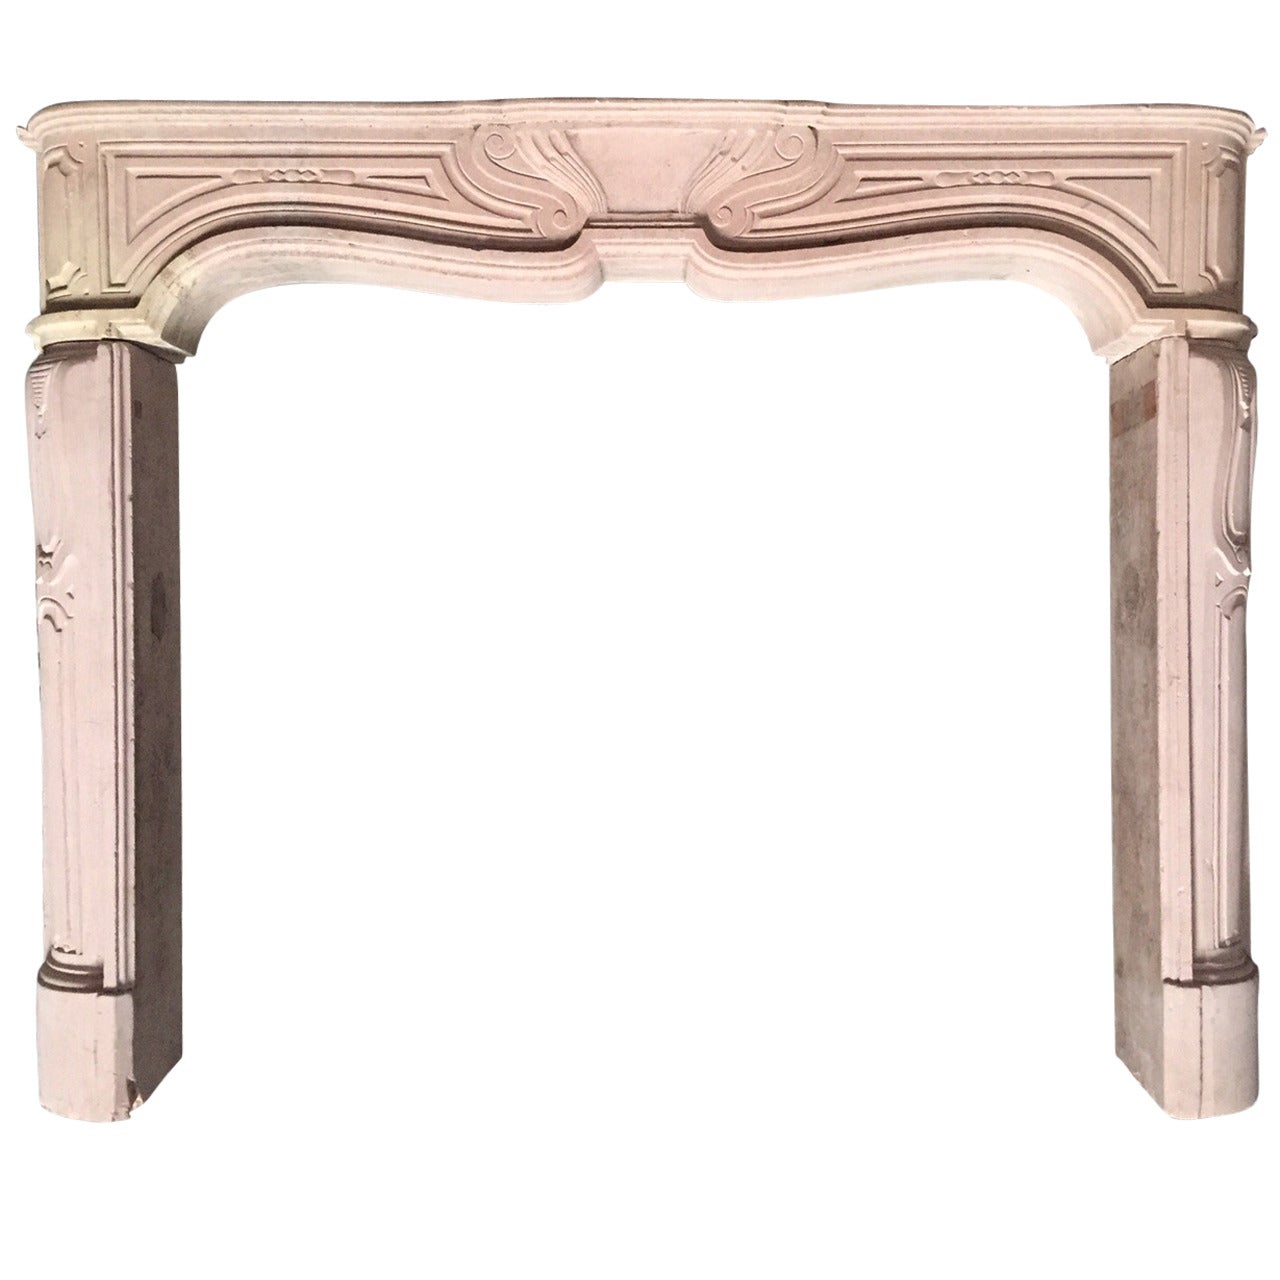 French Parisian Louis XIV Style Fireplace Hand Carved in 18th Century, Paris For Sale